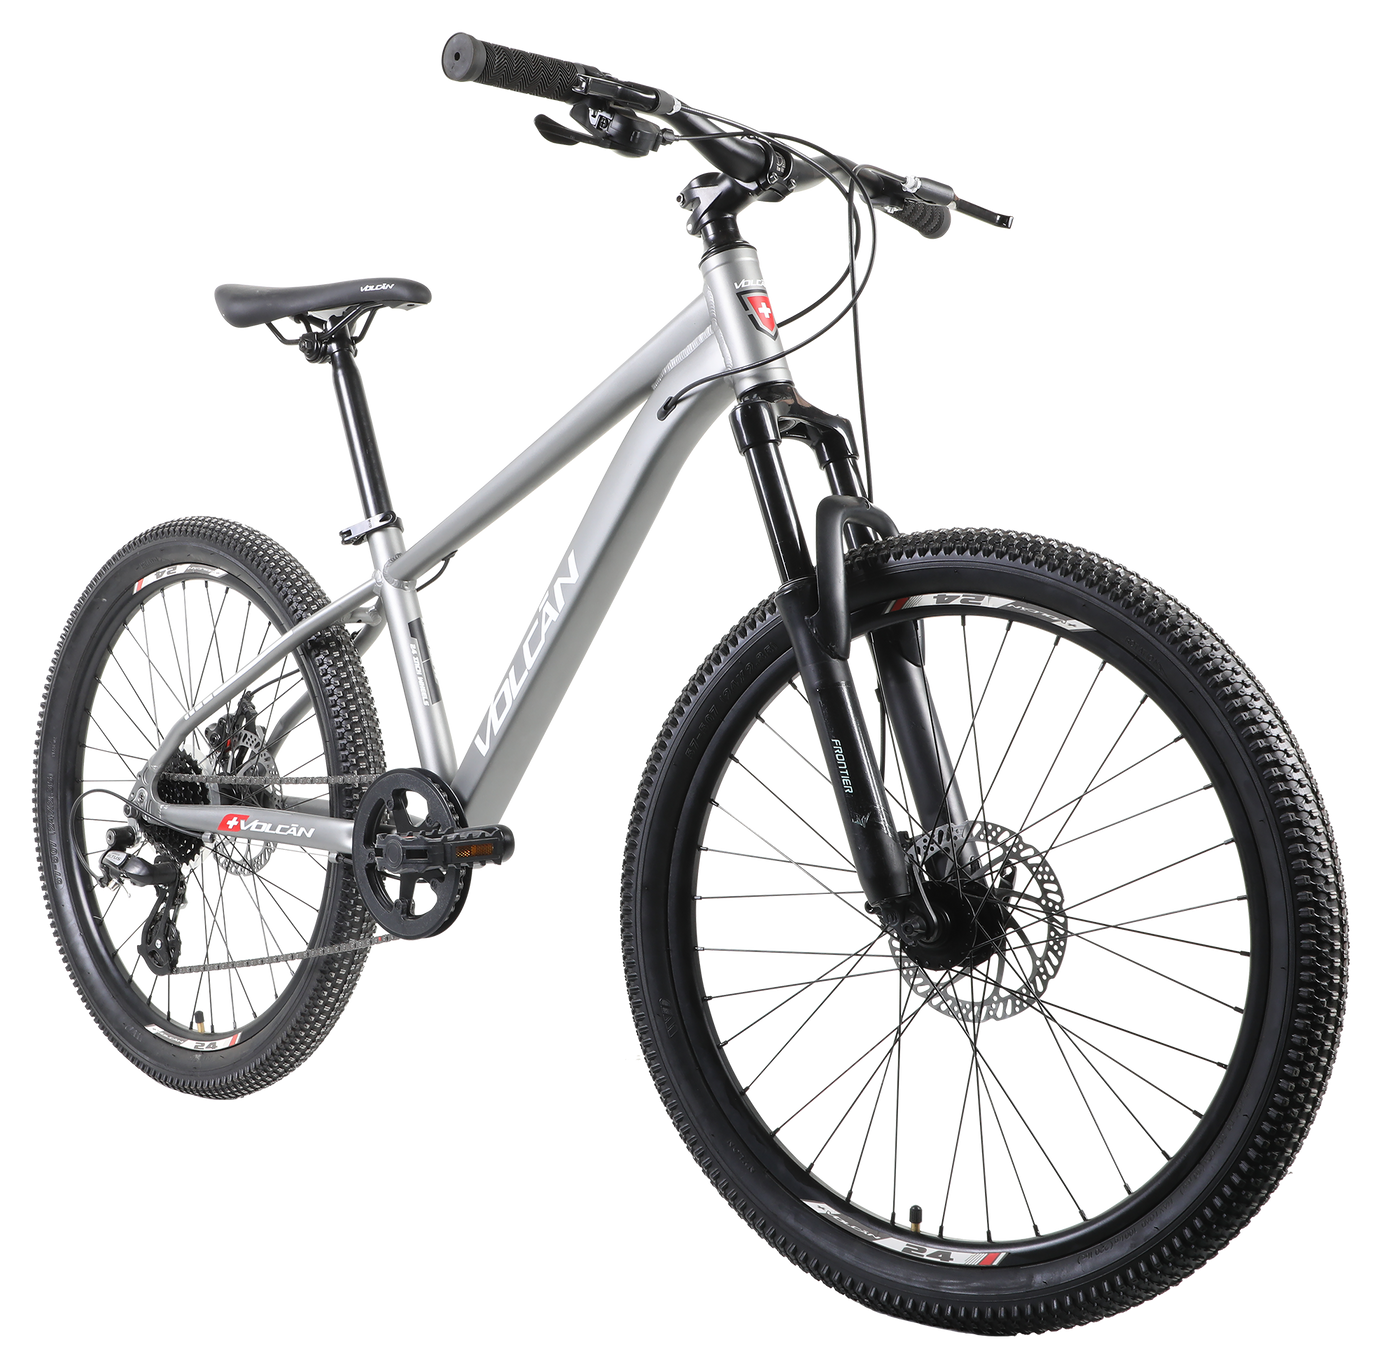 24" MANTLE MOUNTAIN BICYCLE